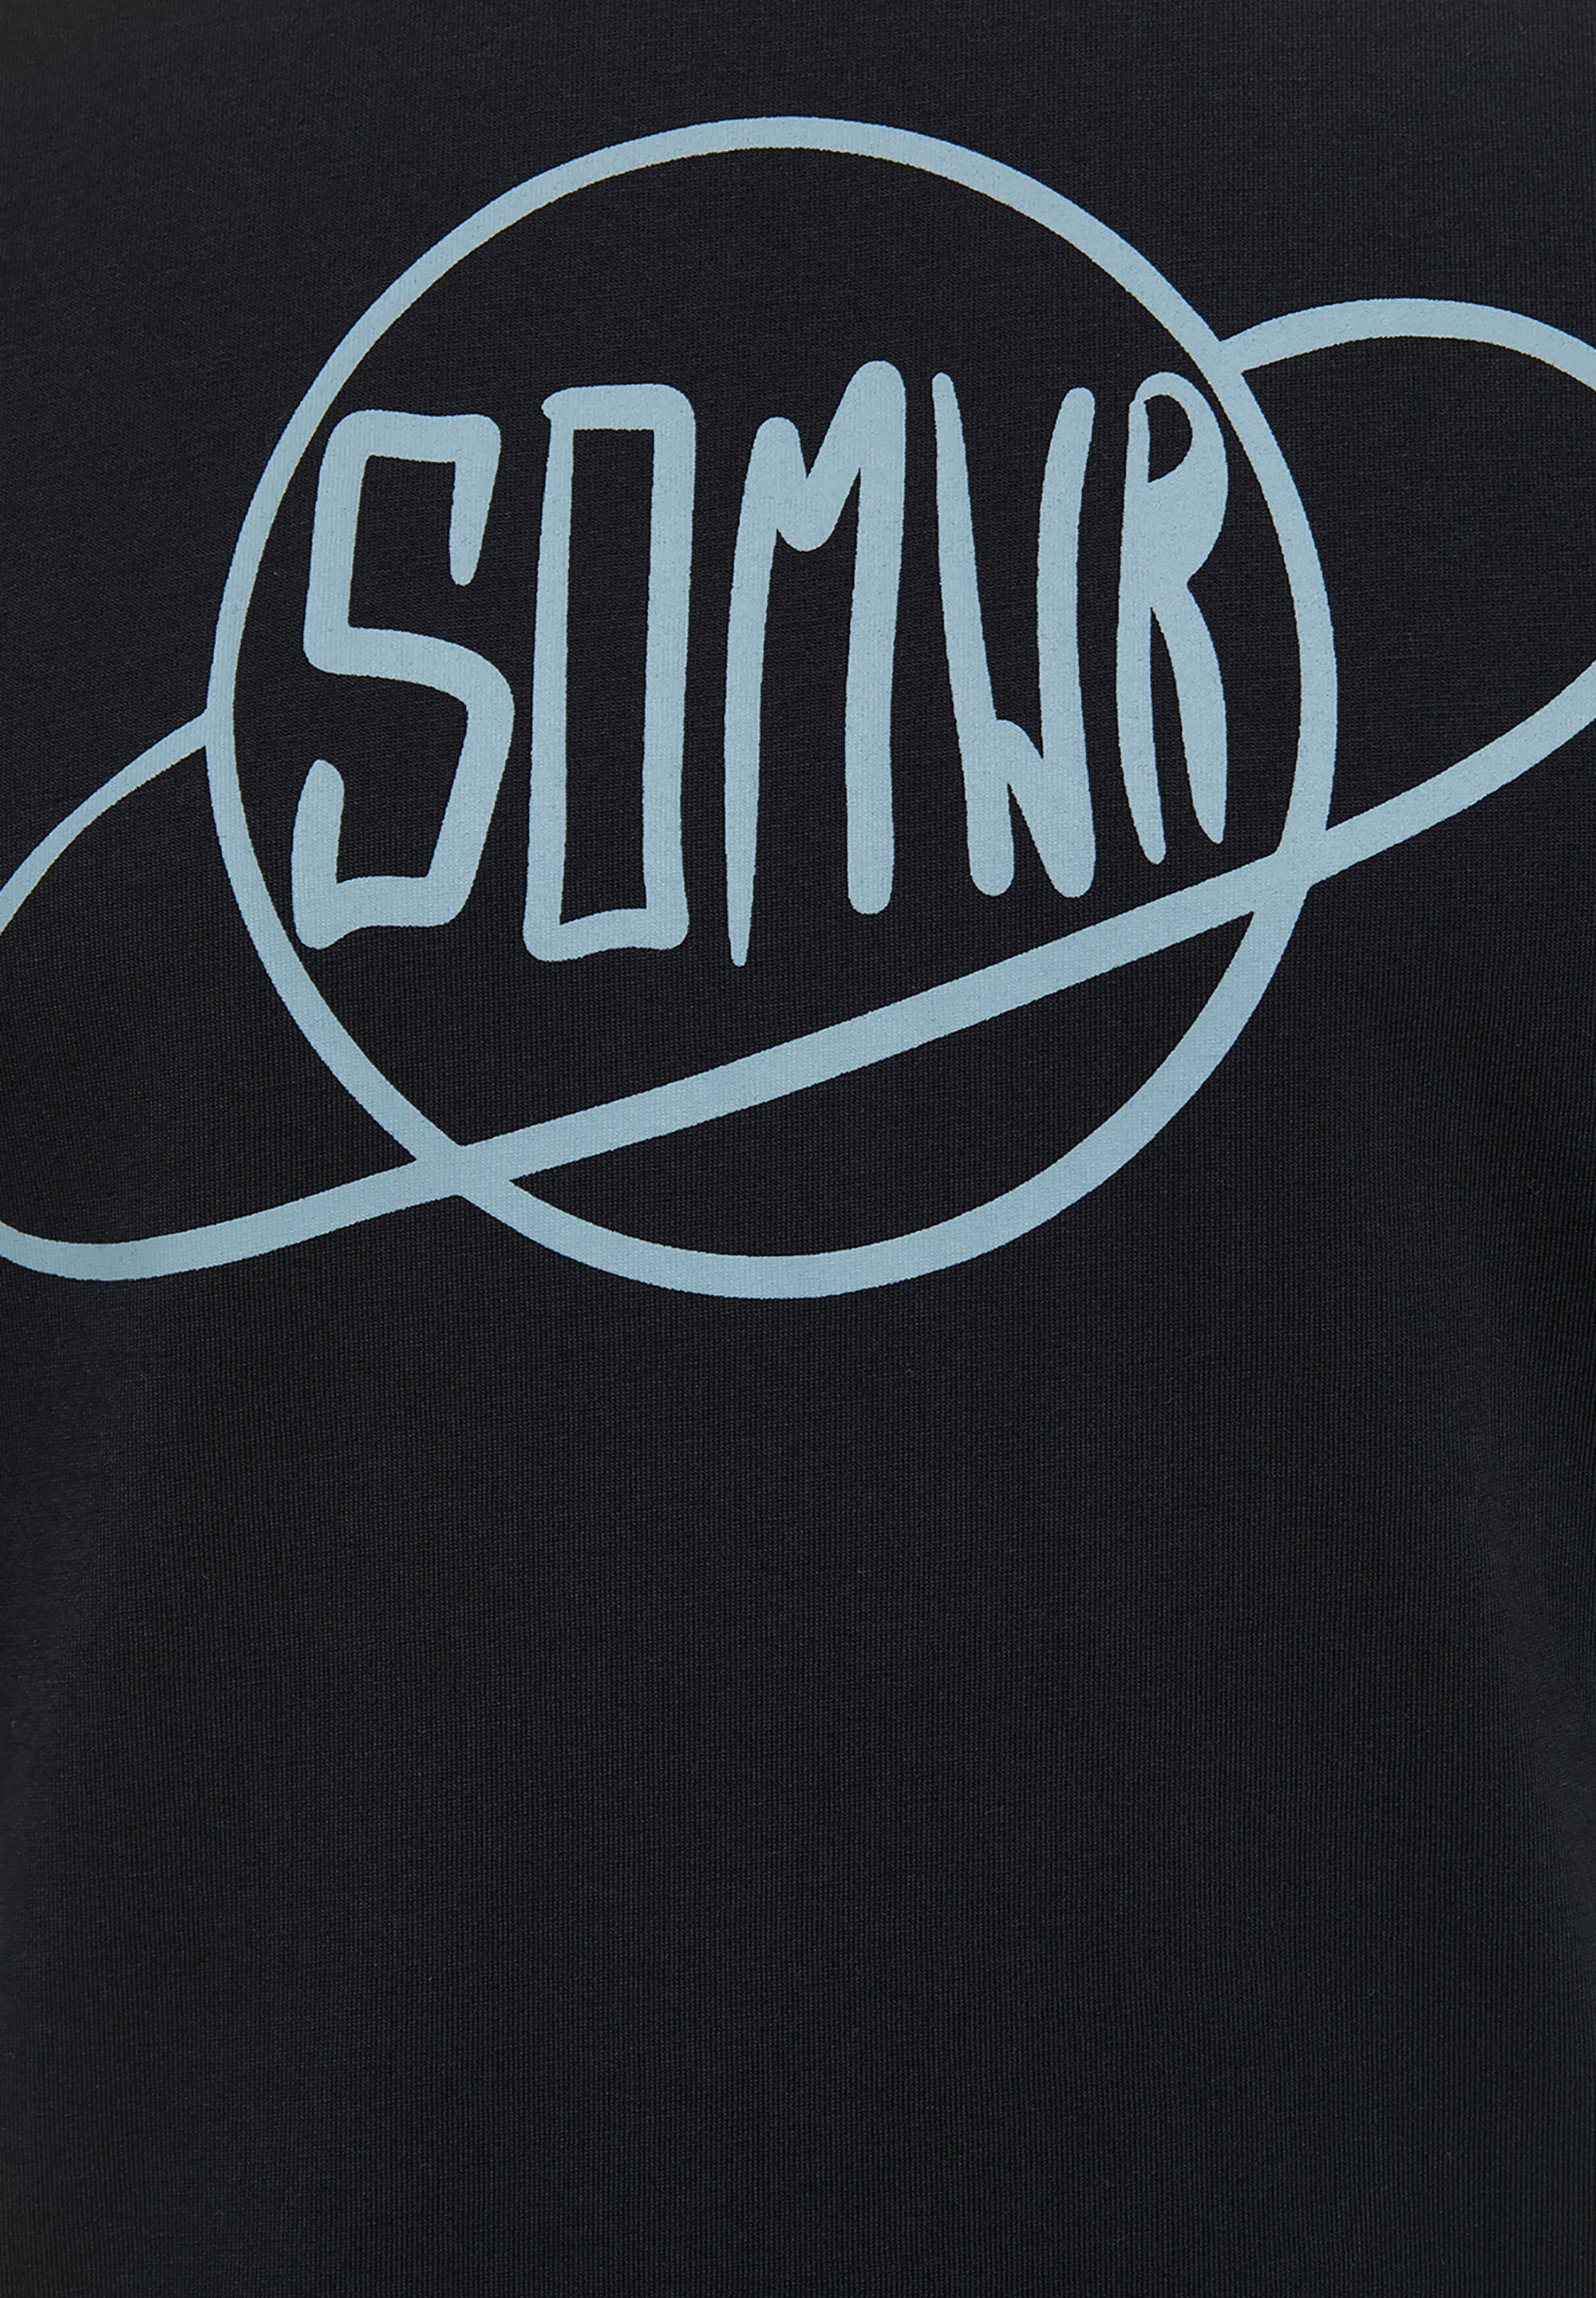 SOMWR PLANET SPHERE TEE T-Shirt BLK000